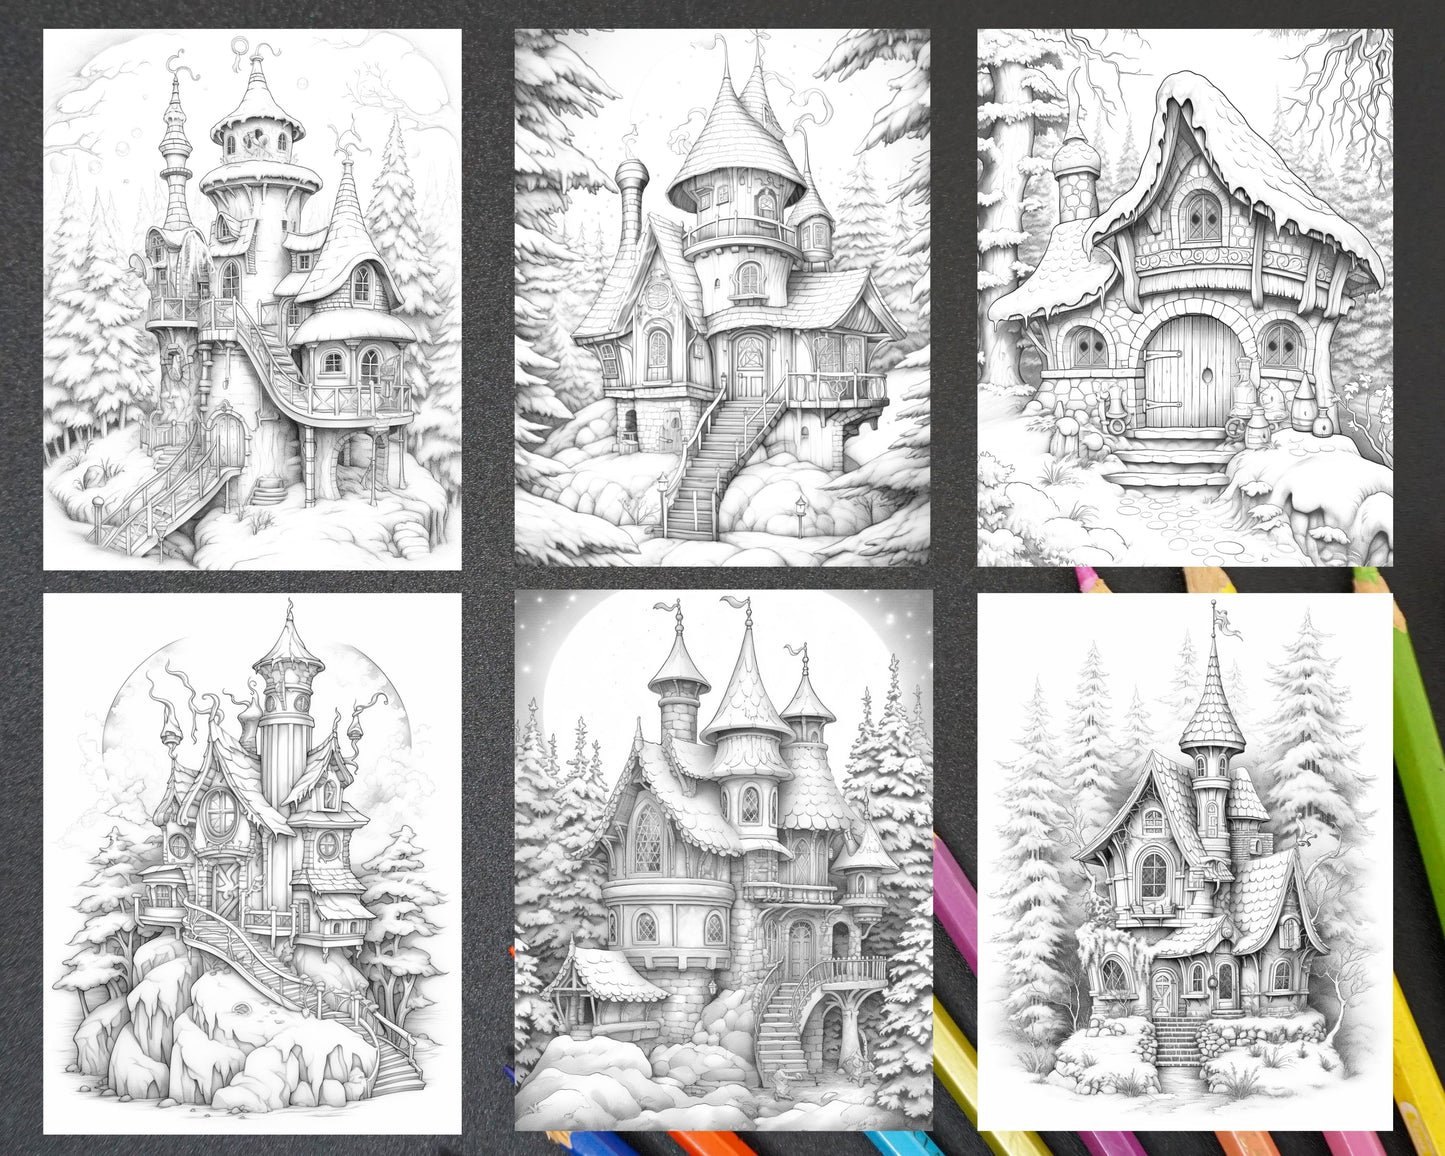 Winter Fairy Houses Grayscale Coloring Pages Printable for Adults